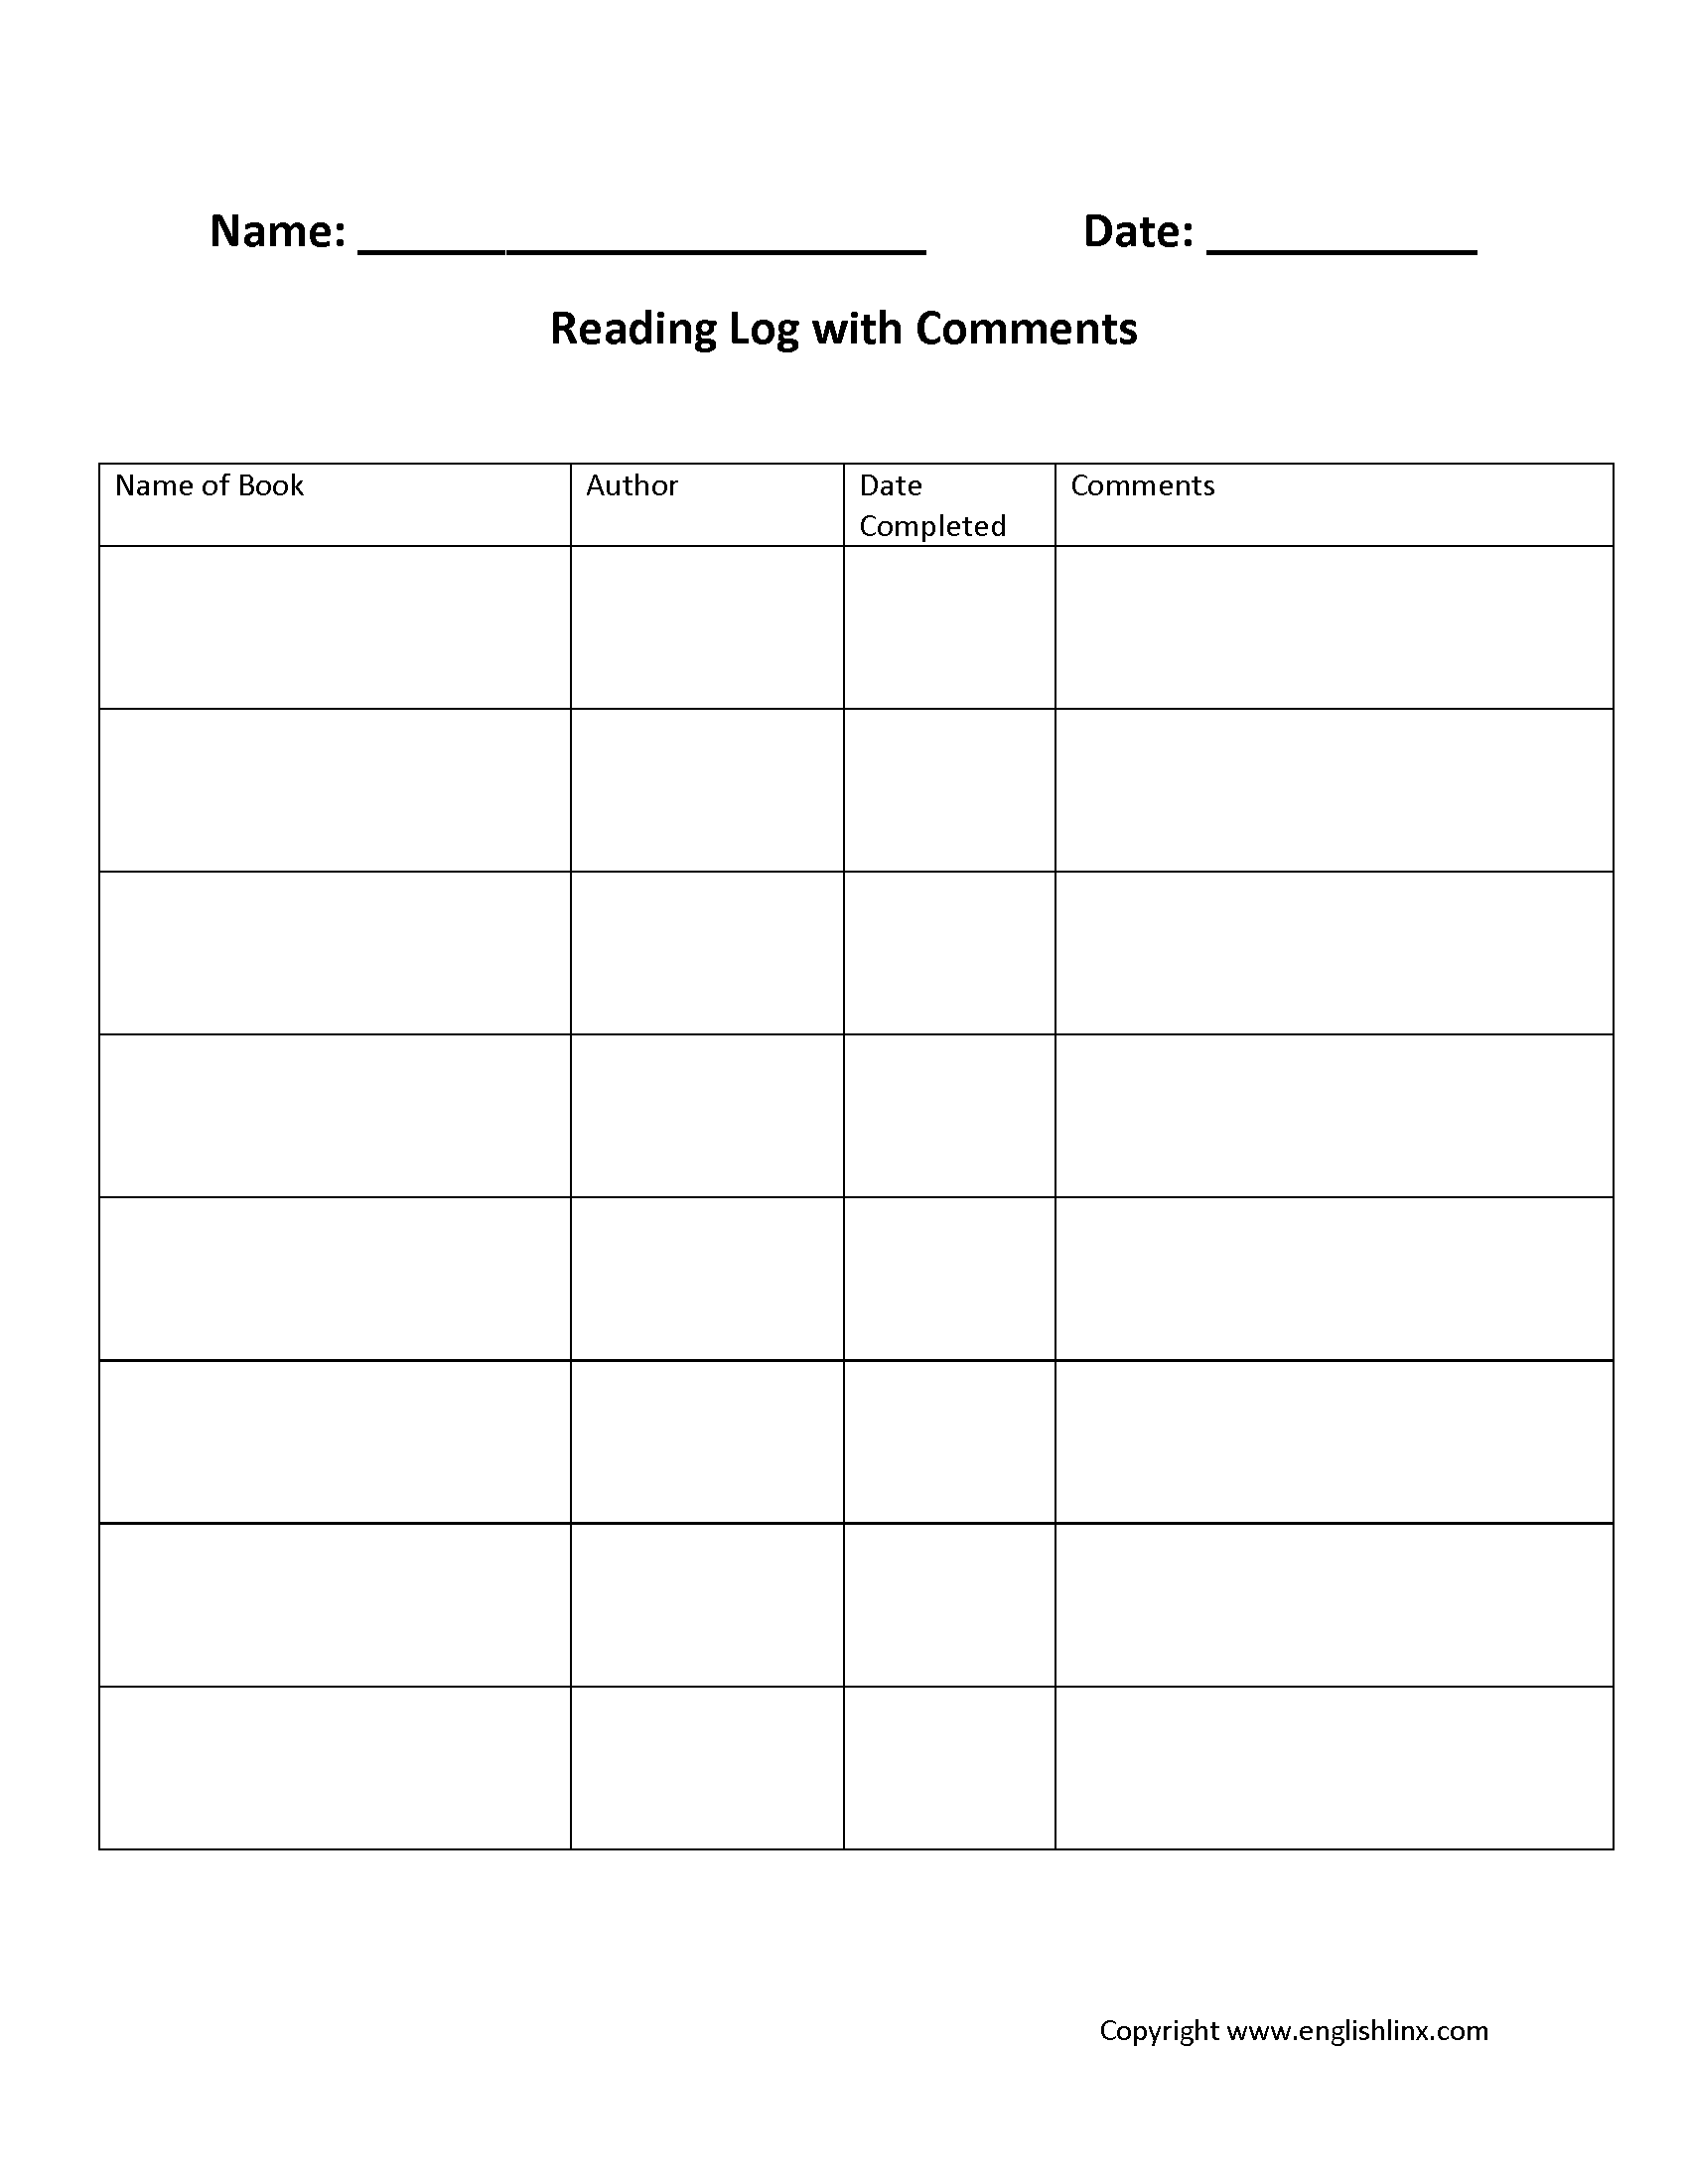 Reading Log with Comments Worksheet